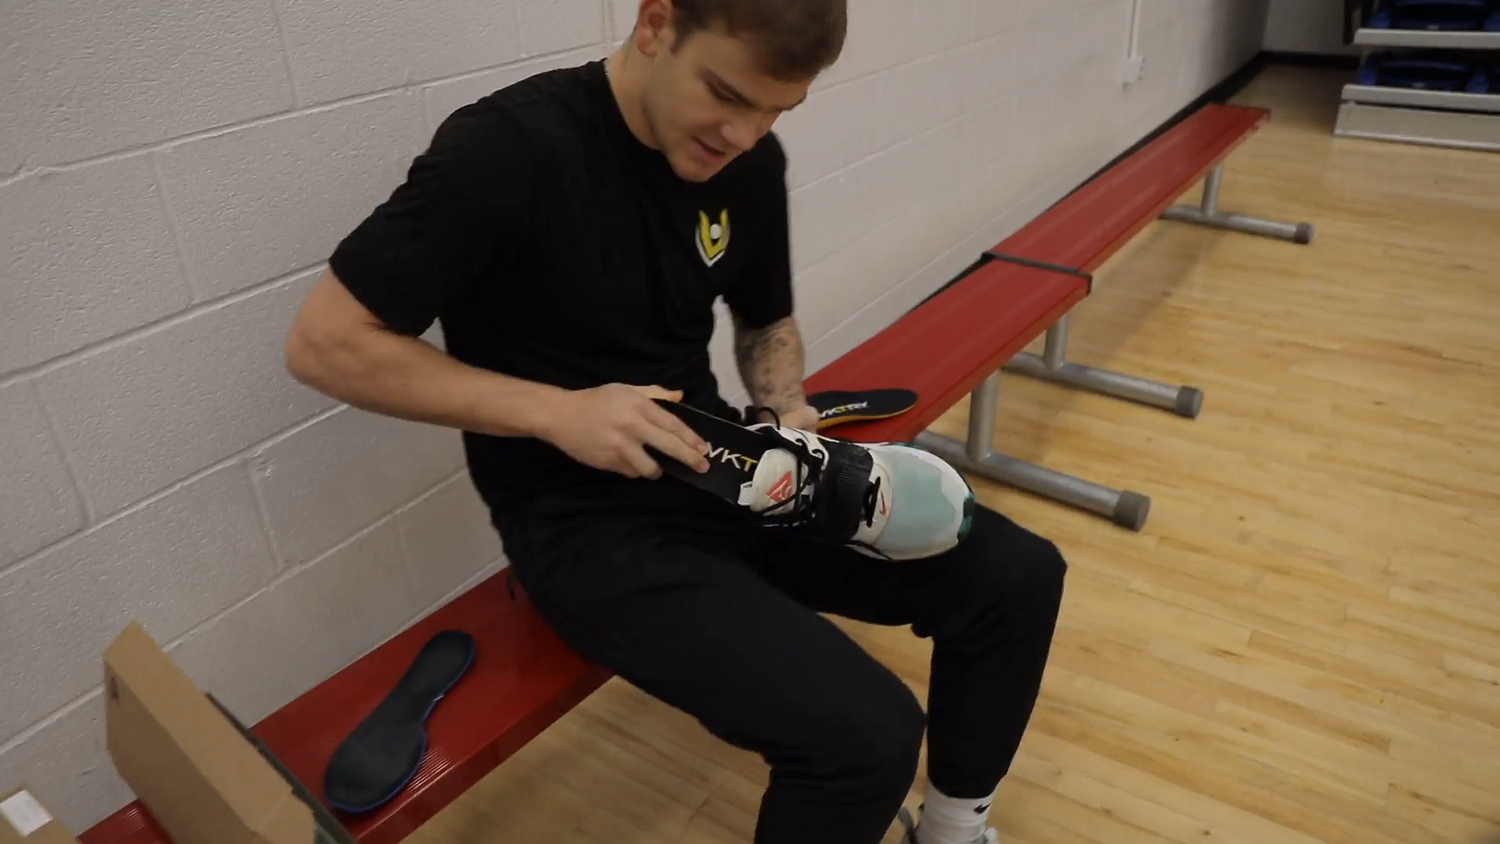 jump higher, get more explosive, land softer, and protect from injuries like Mac Mcclung with VKTRY Insoles for basketball